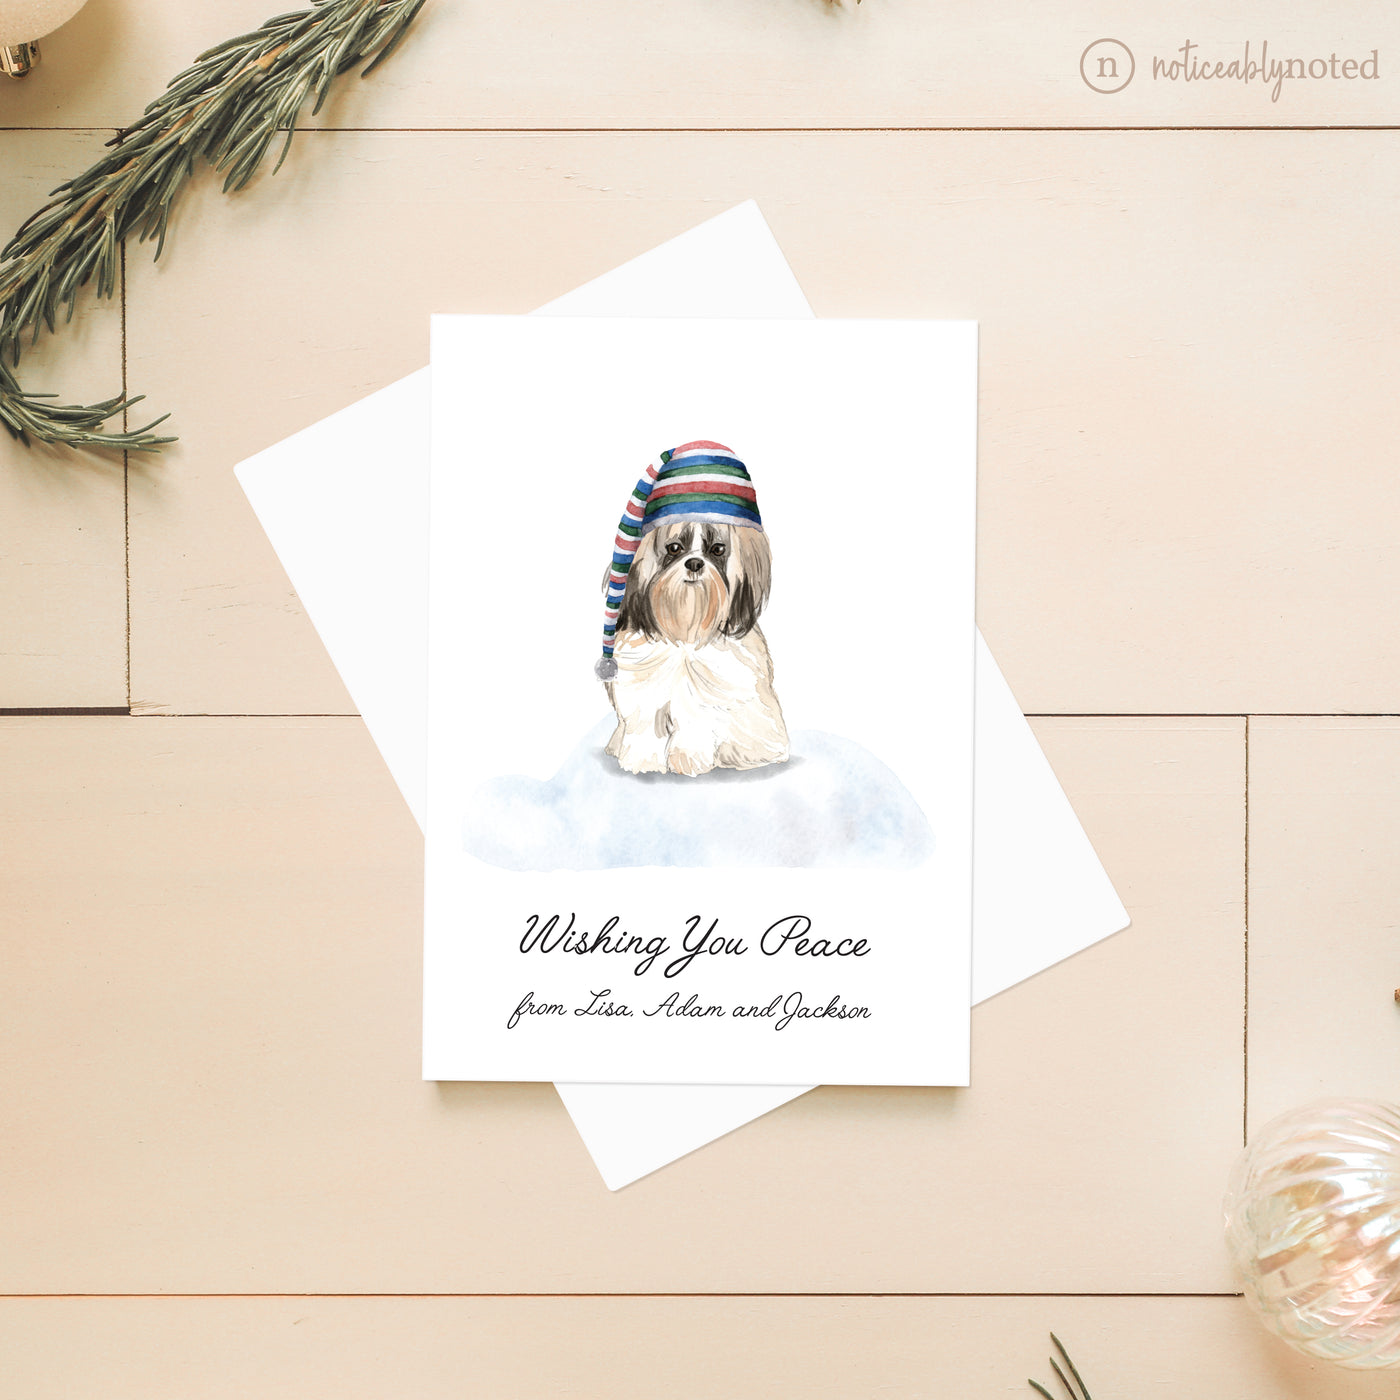 Shih Tzu Holiday Card | Noticeably Noted